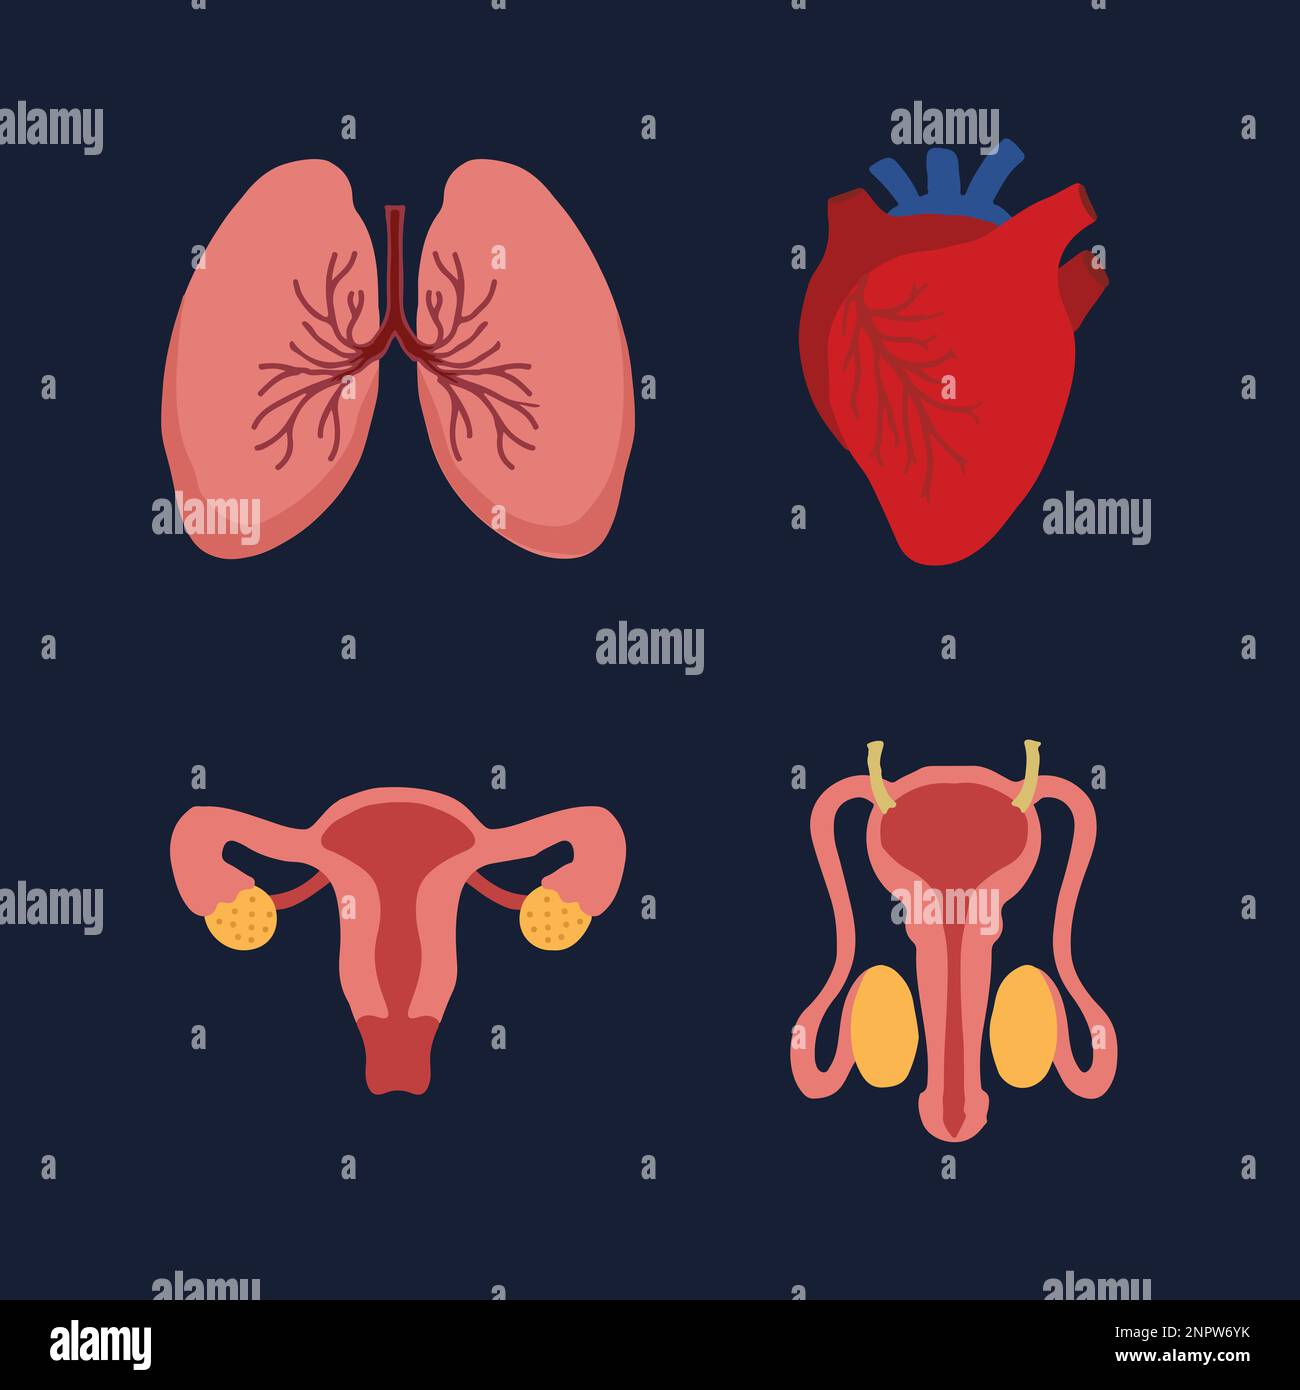 Human Internal organs, cartoon anatomy body parts, heart and lungs, male and female reproductive system, vector illustration. Stock Vector